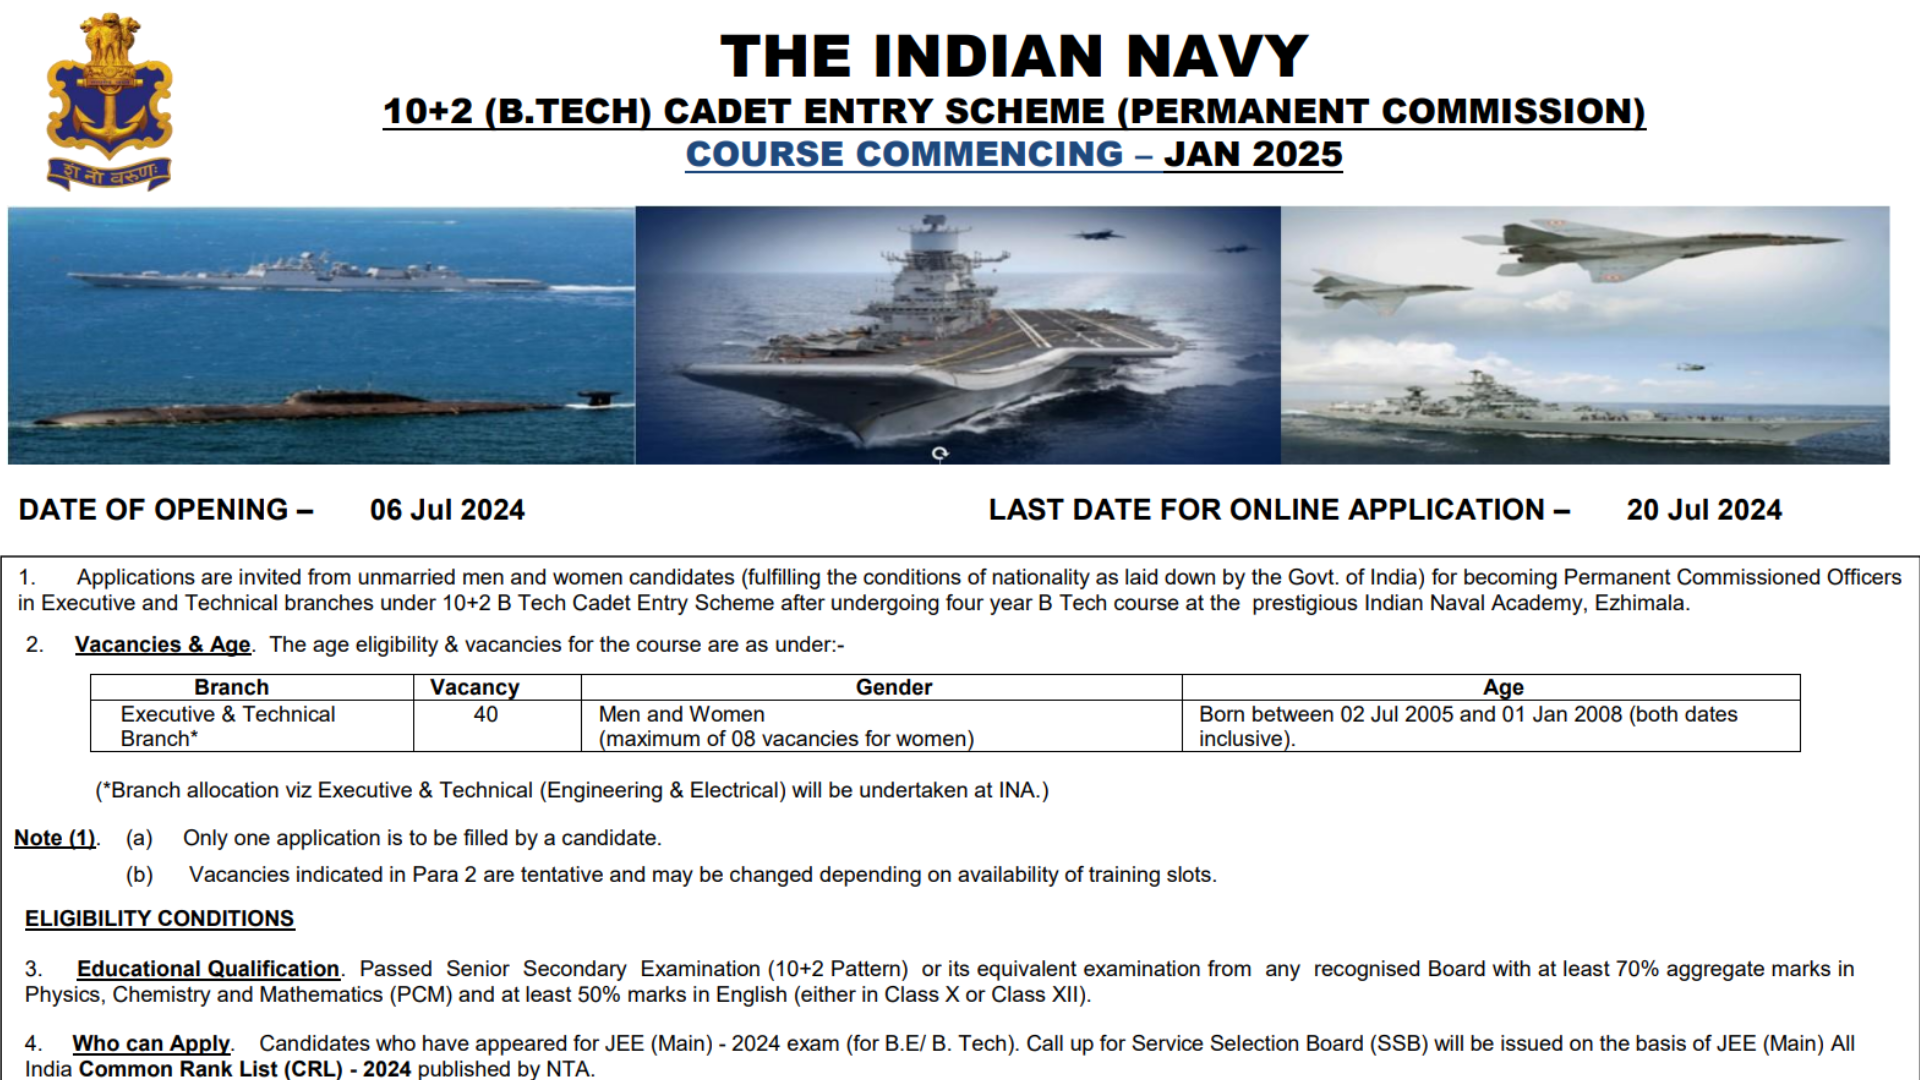 Navy 10+2 (B.Tech) Cadet Entry Scheme Notification Out for JAN 2025 Course, Apply Online